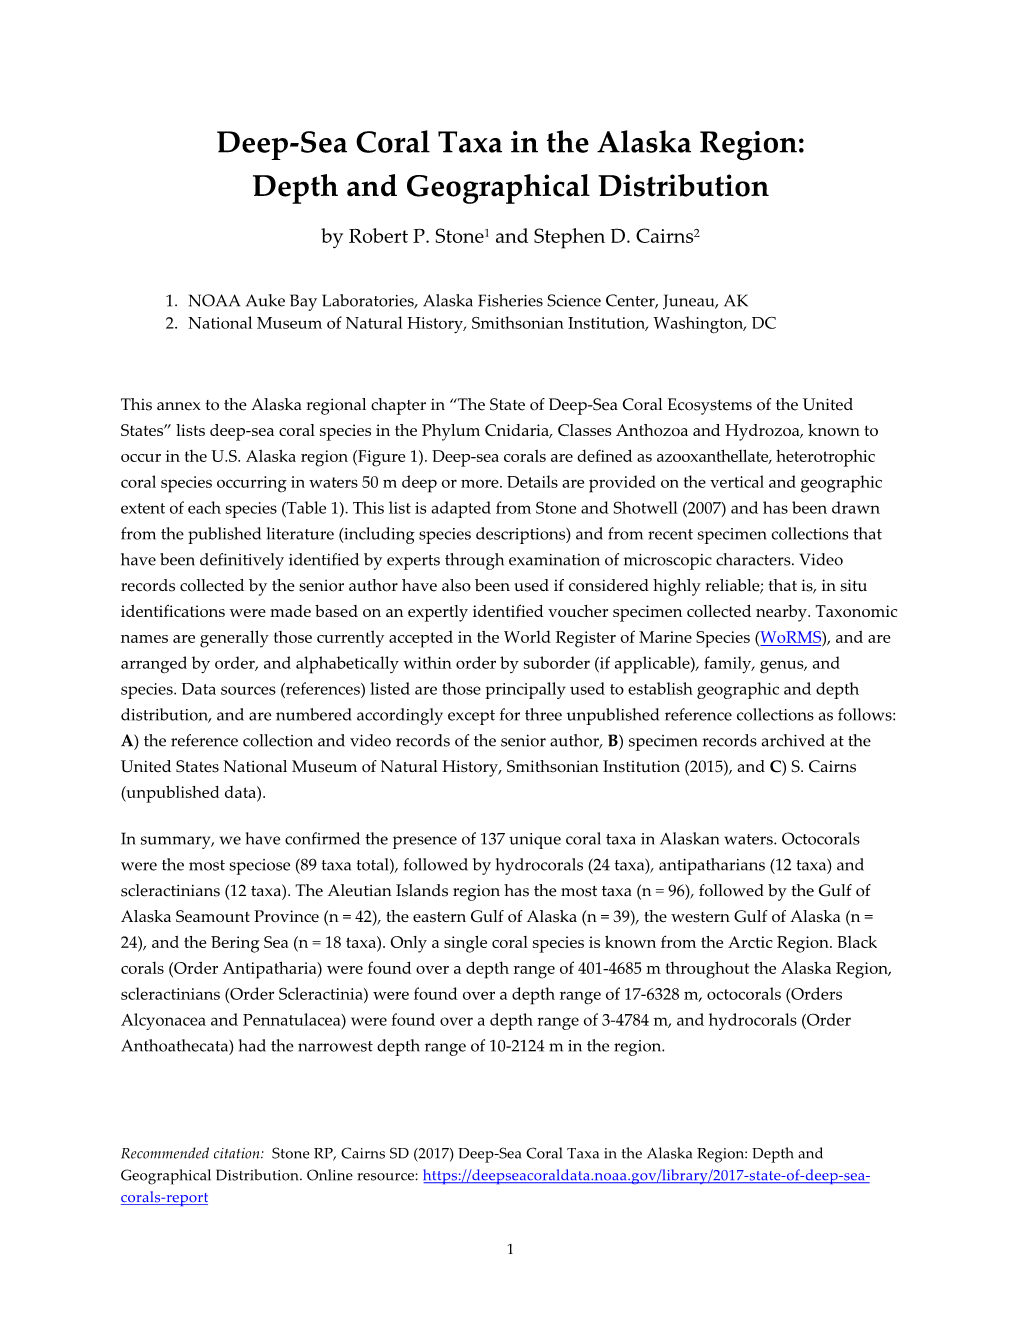 Deep-Sea Coral Taxa in the Alaska Region: Depth and Geographical Distribution